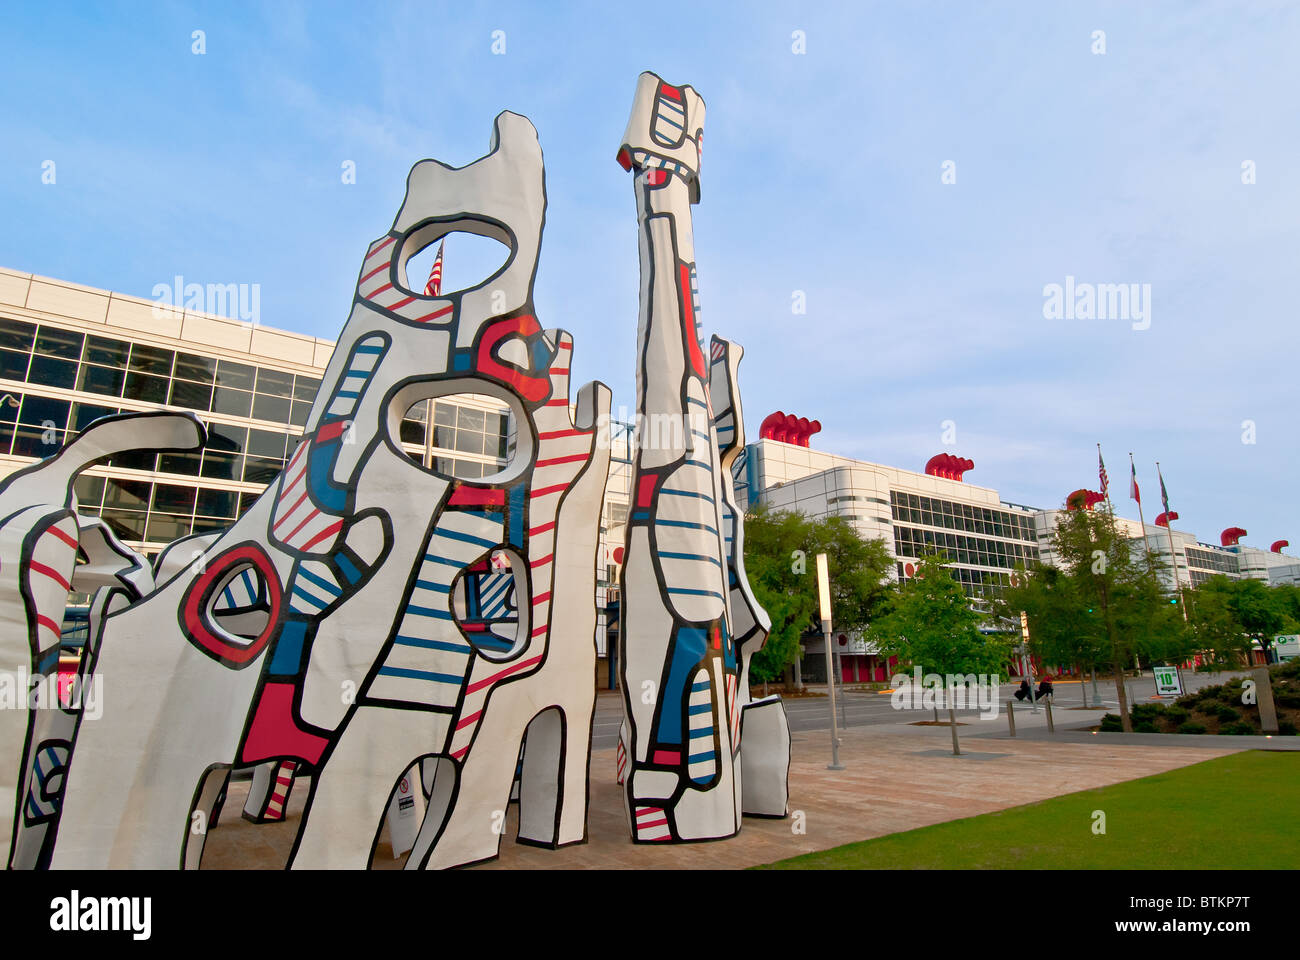 'Monument Au Fantome' sculpture by Jean Dubuffet, Discovery Green across from George R. Brown Convention Center, Houston, Texas Stock Photo